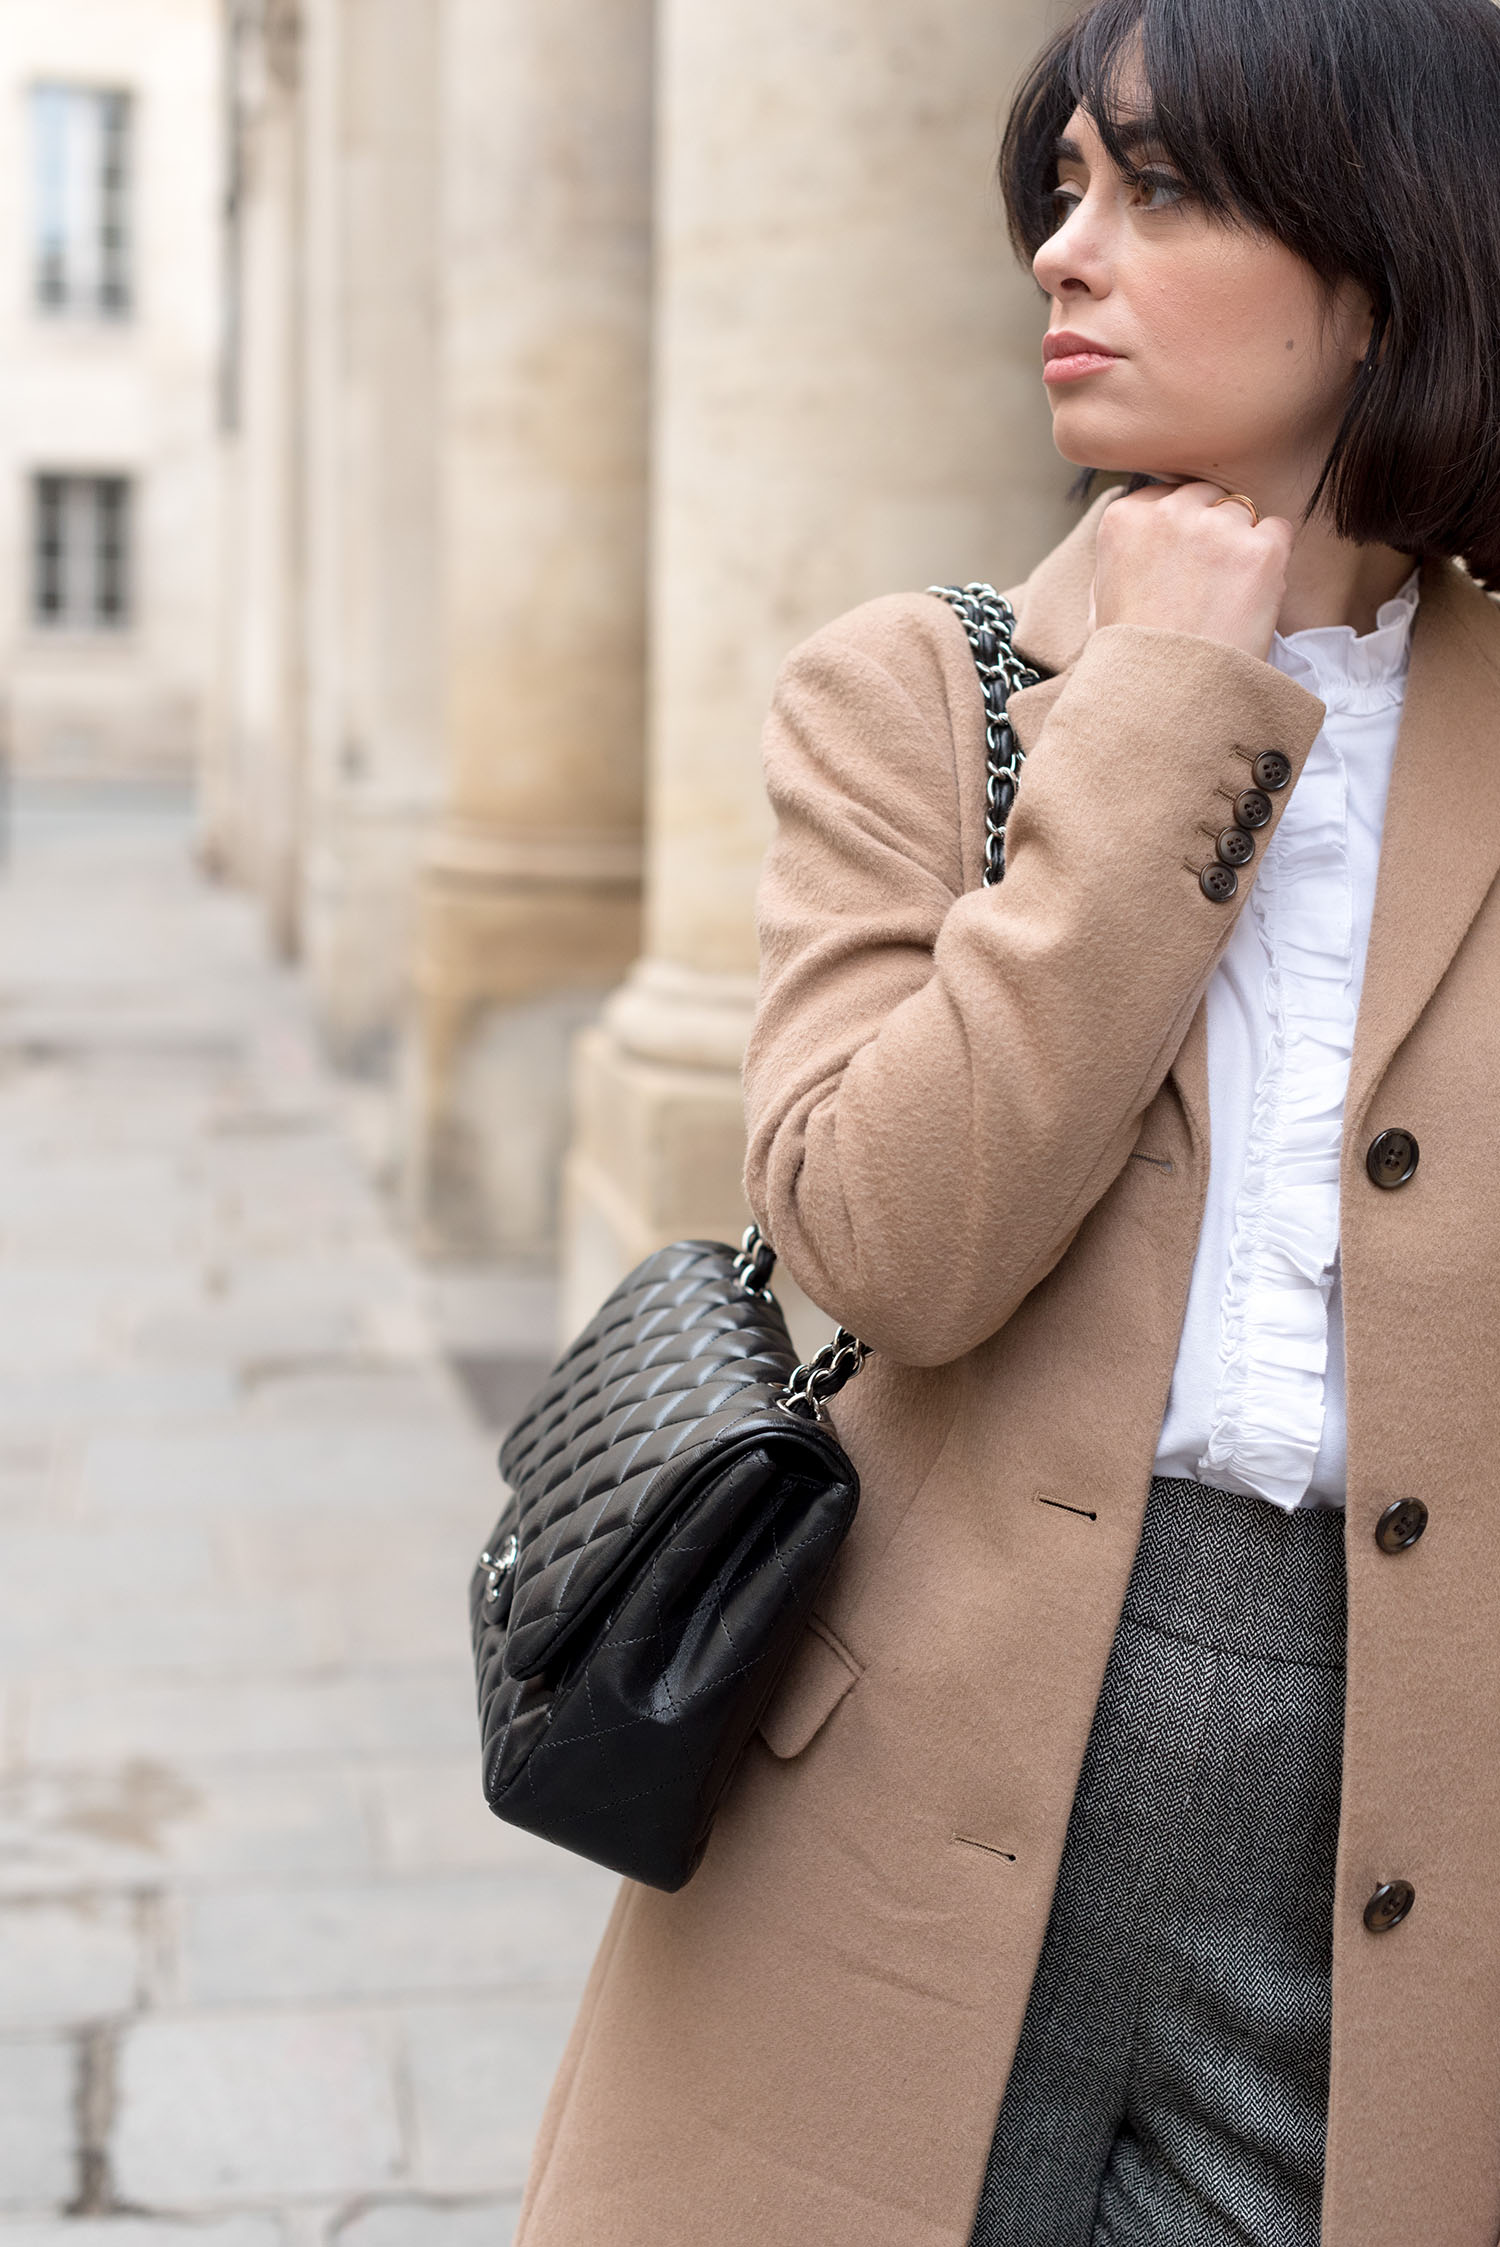 Portrait of top Winnipeg fashion blogger Cee Fardoe of Coco & Vera at the Palais Royal in Paris, wearing a Sezane blouse and carrying a Chanel single flap handbag